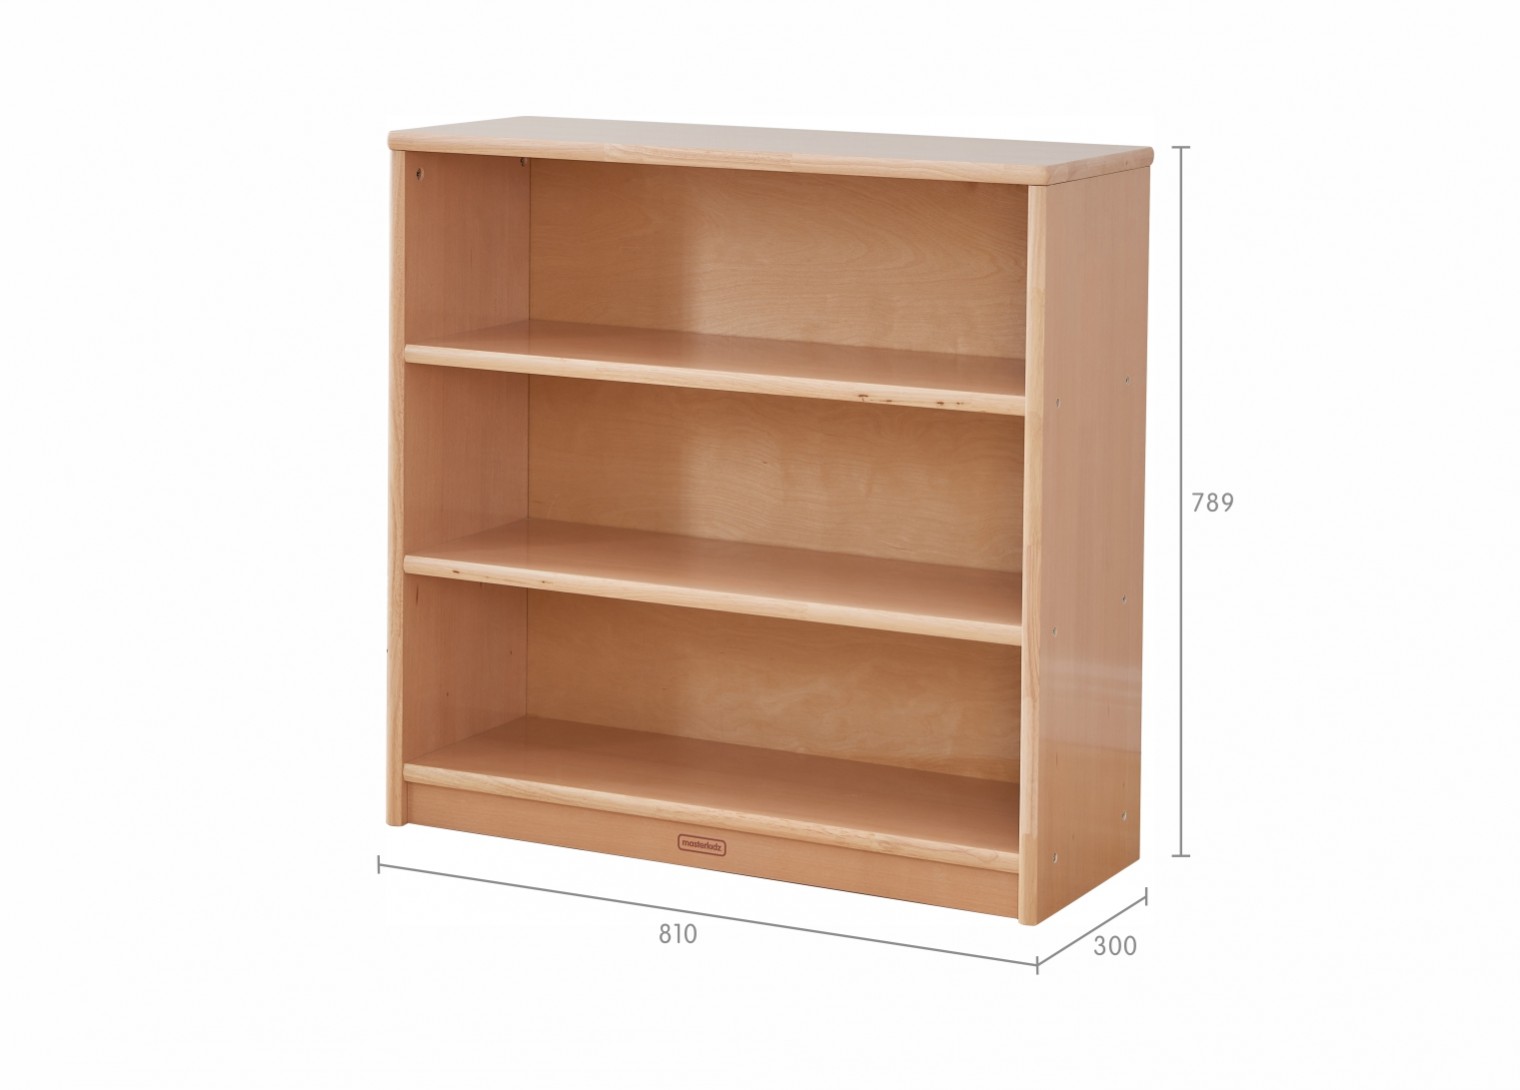 Forest School - 789H x 810L Wooden  Shelving Unit - Plywood Back